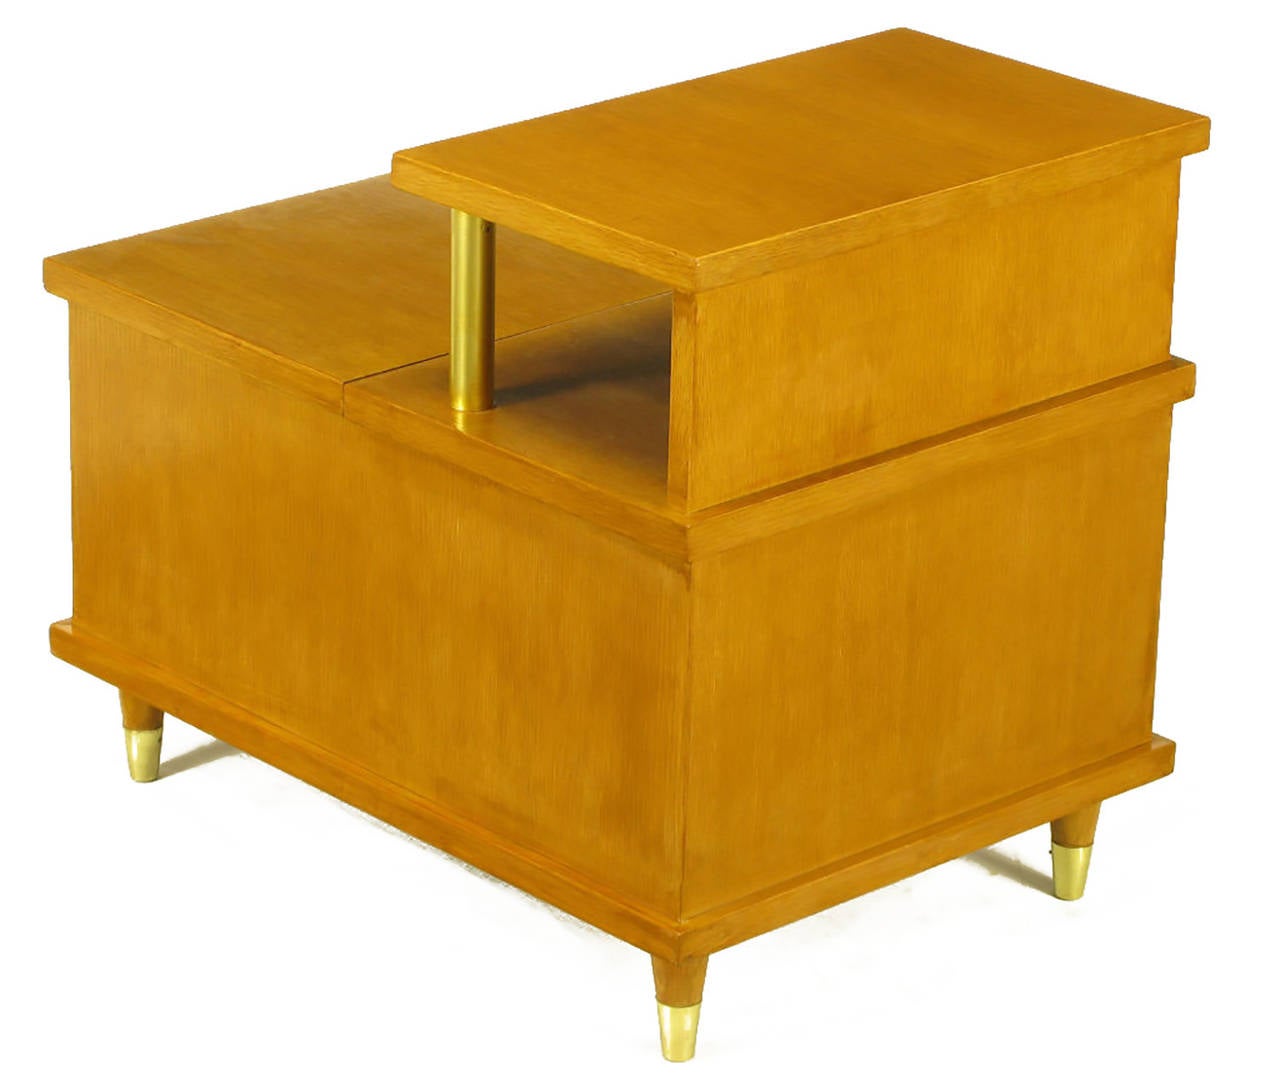 Mid-20th Century Pair of Two-Tier End Tables with Cedar-Lined Storage